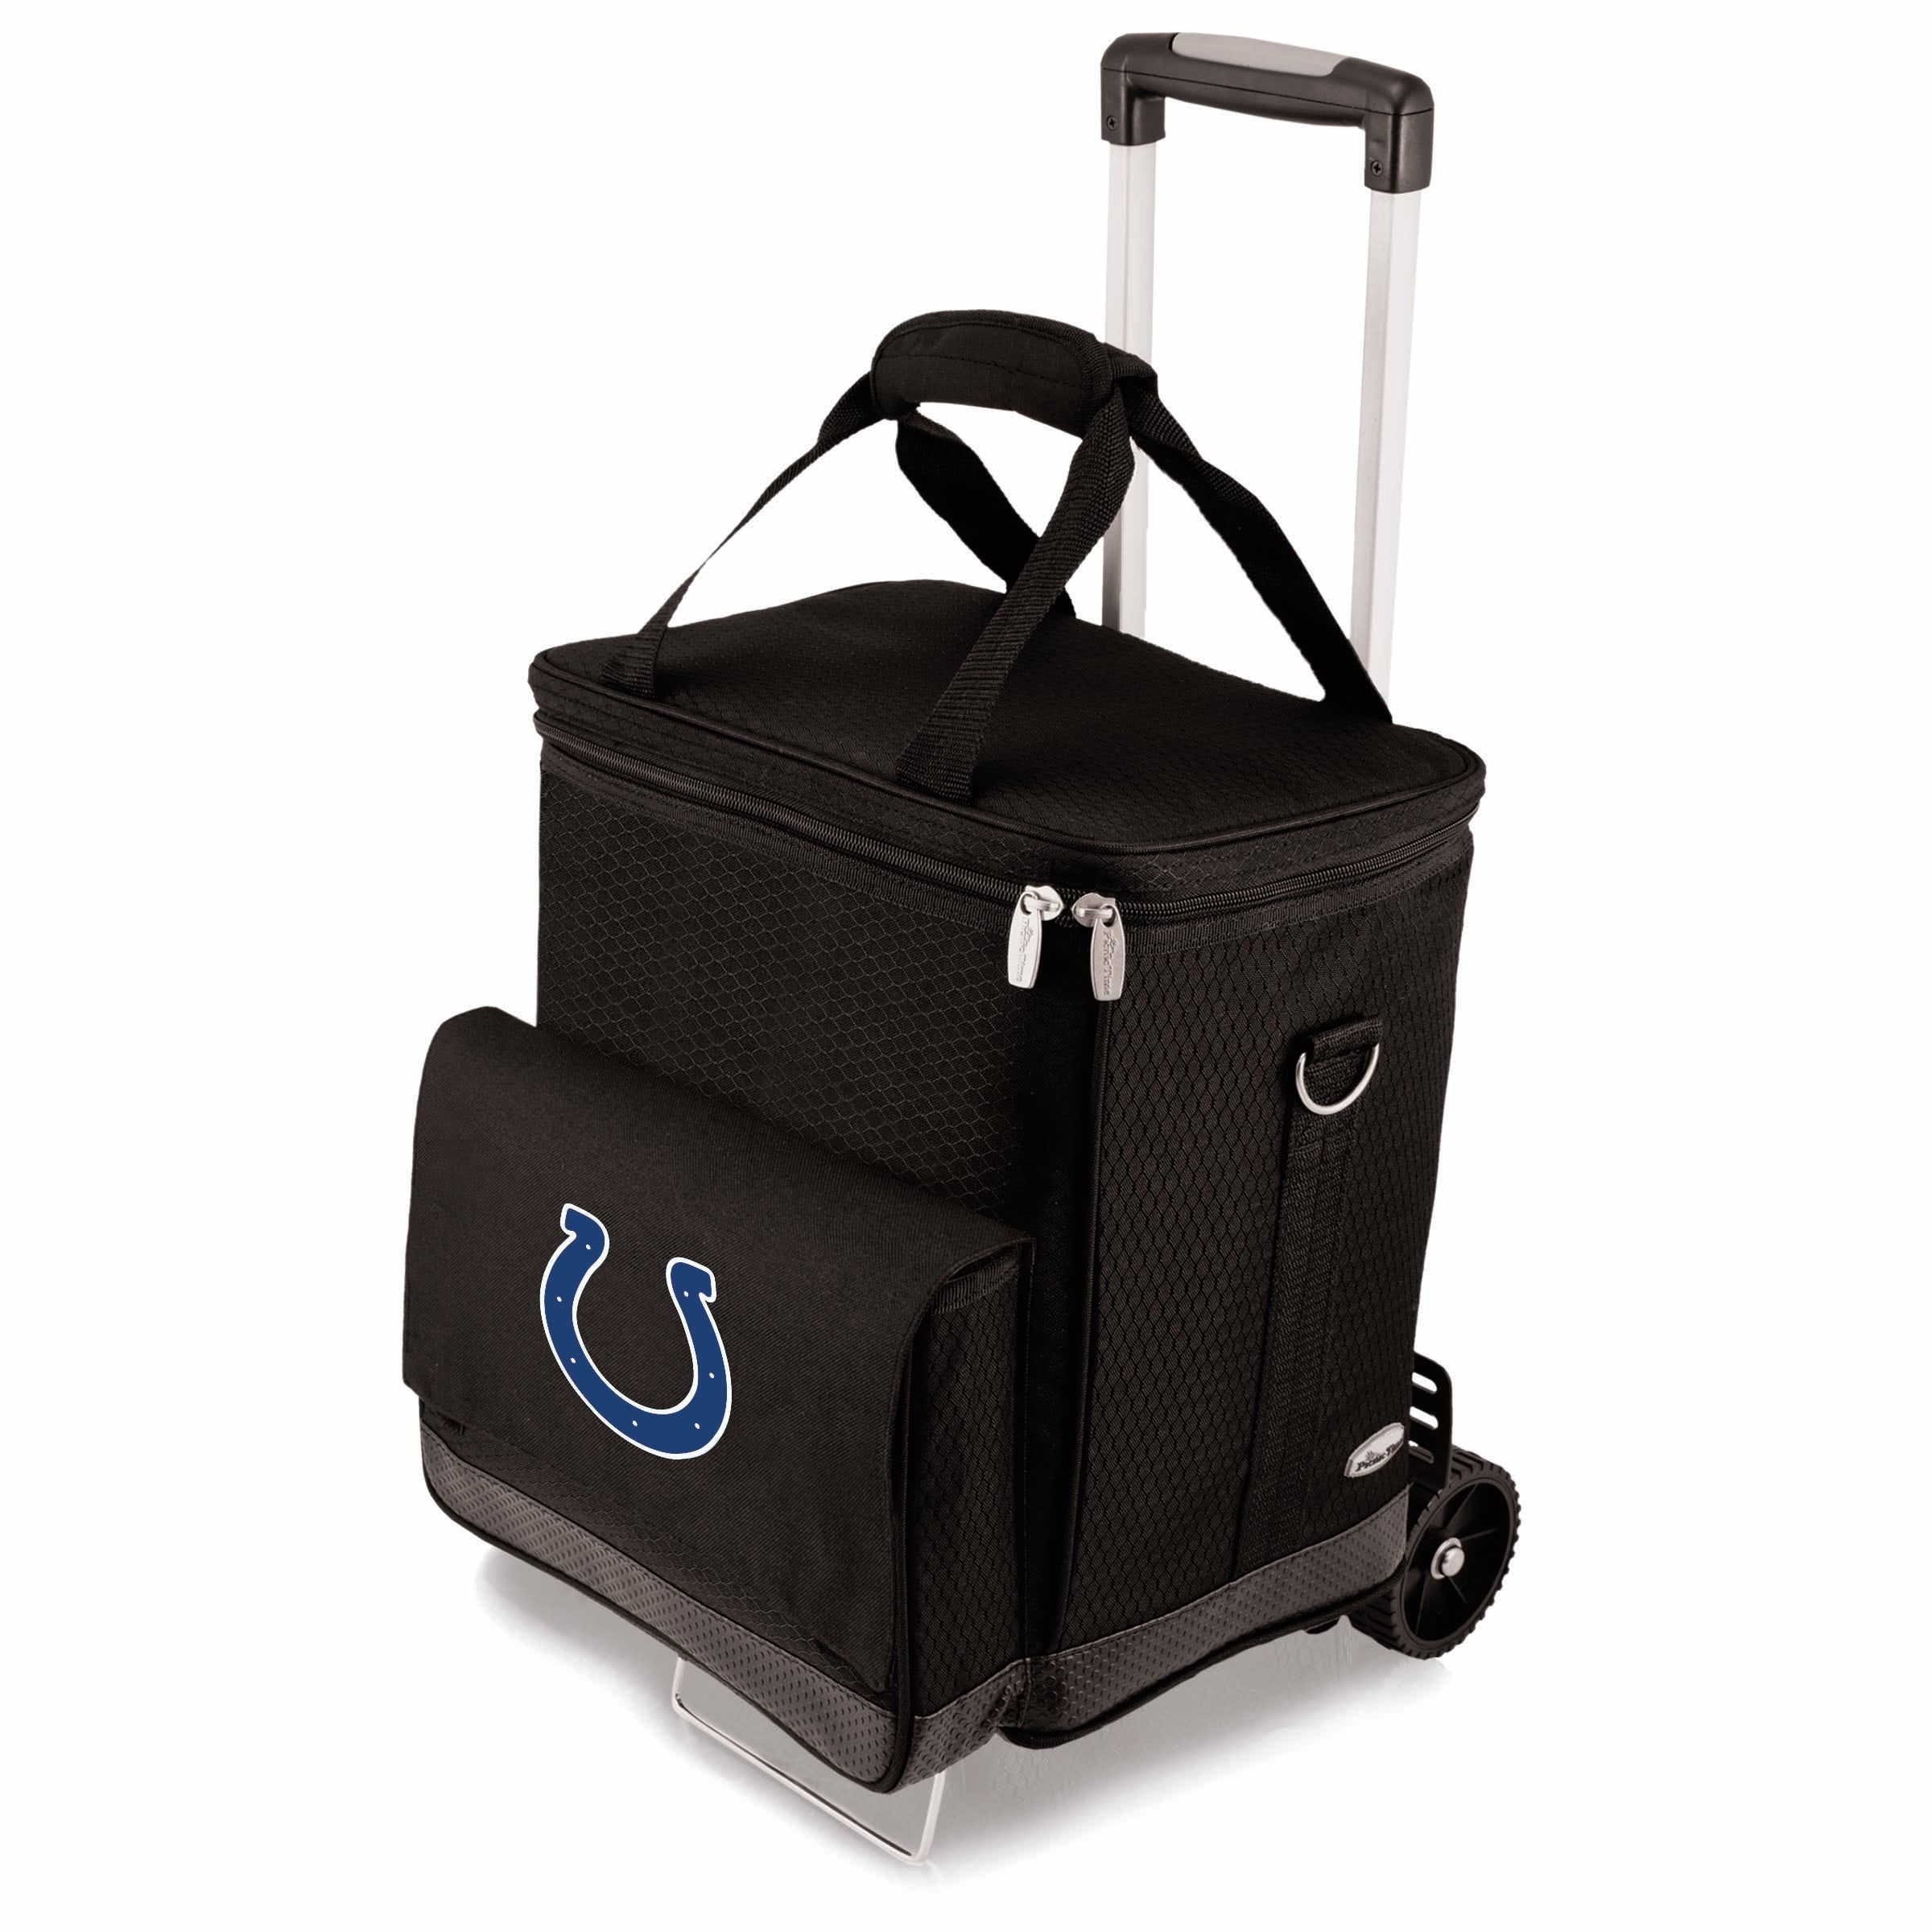 Indianapolis Colts - Cellar 6-Bottle Wine Carrier & Cooler Tote with Trolley